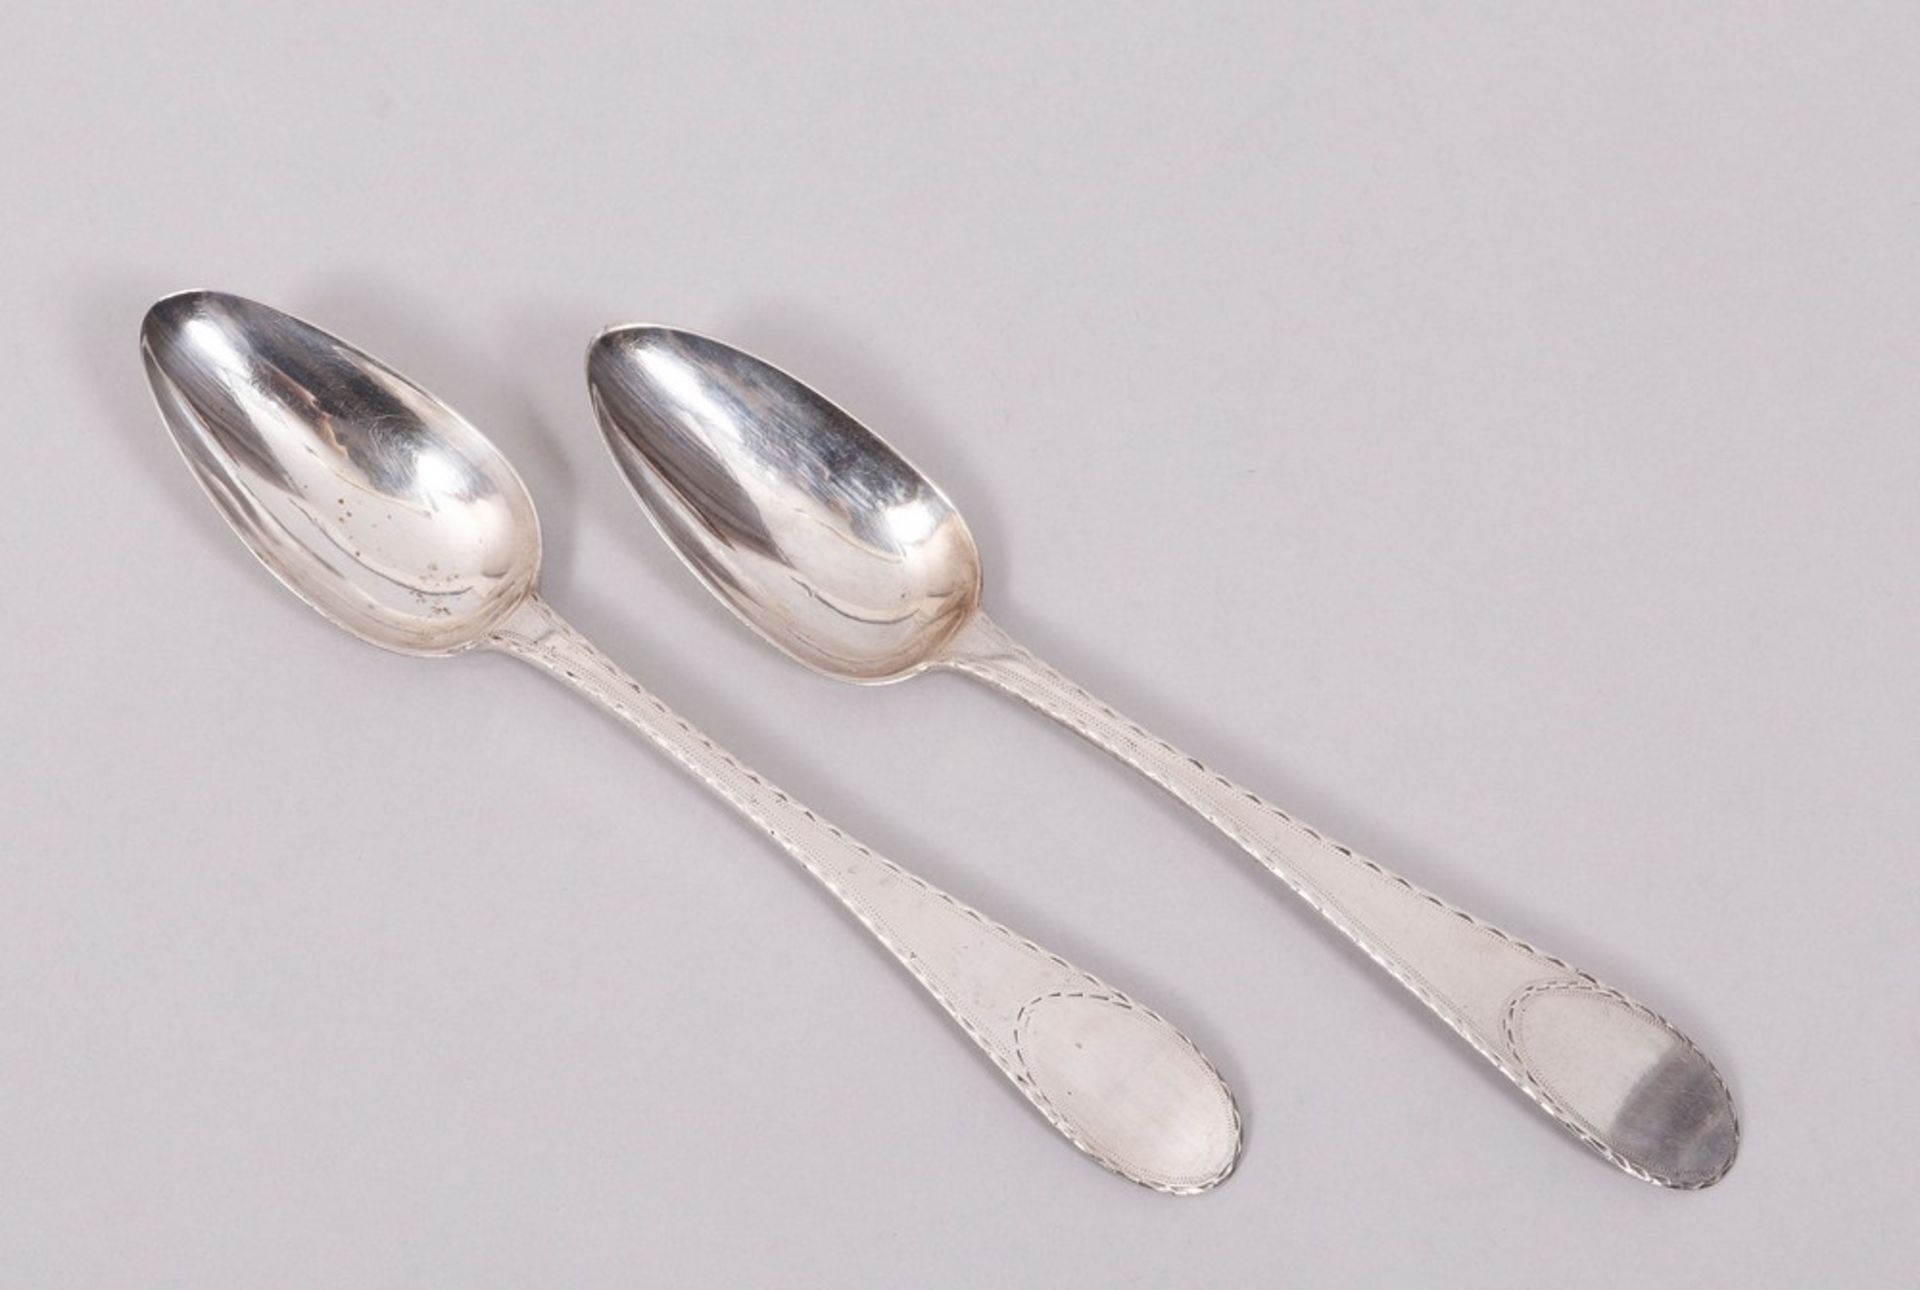 6 dining spoons, silver, German, c. 1800/10 - Image 3 of 7